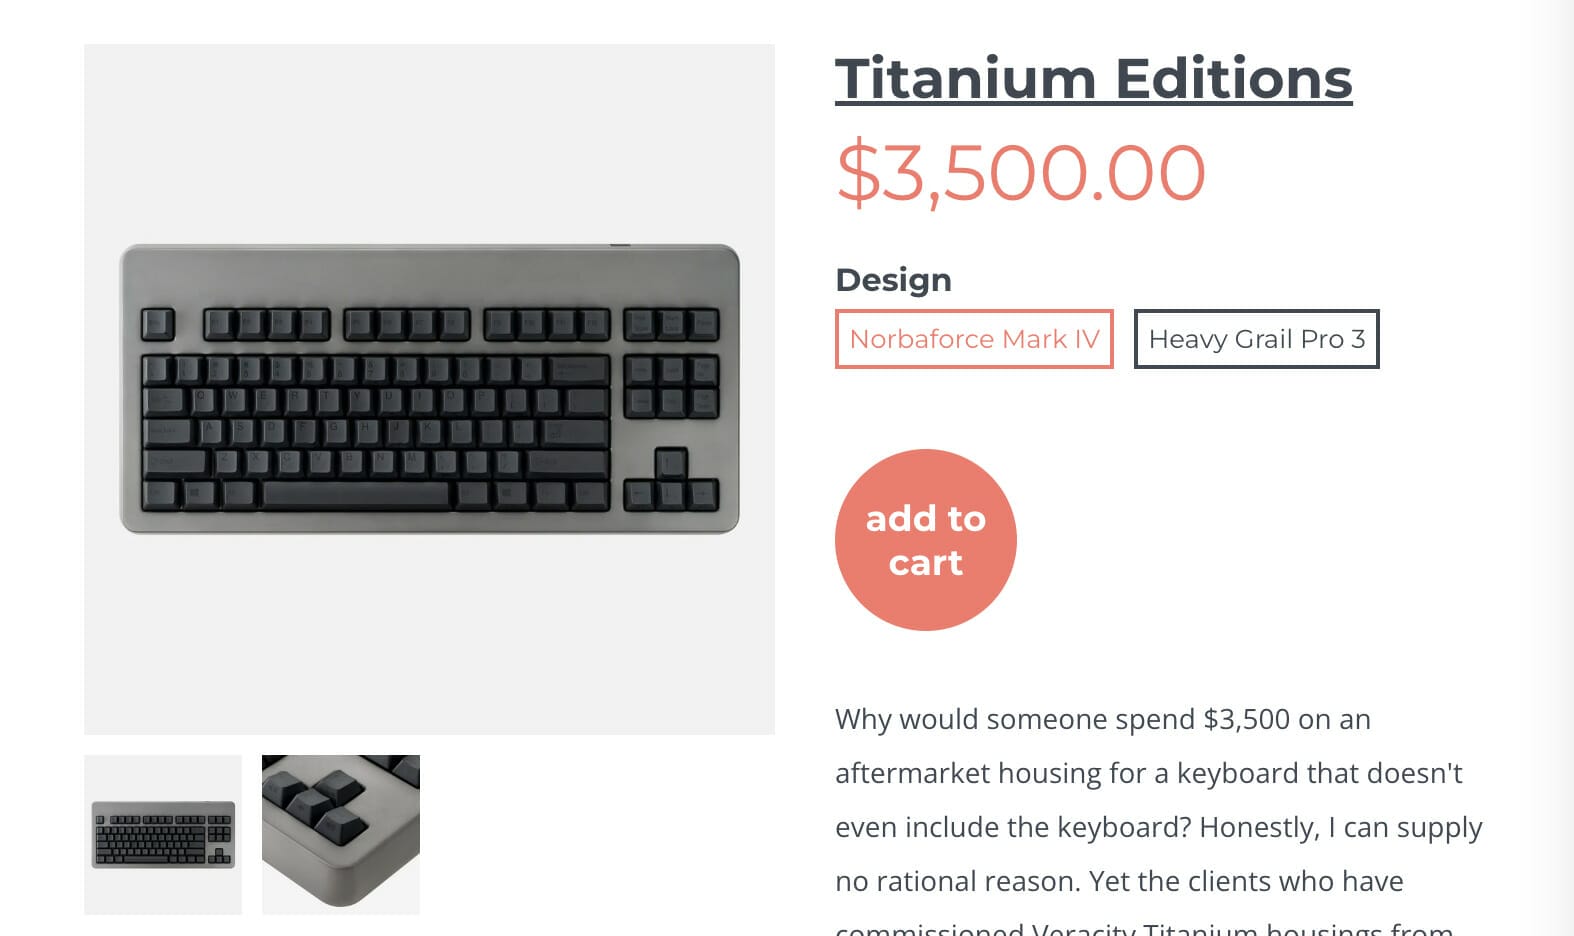 The most expensive keyboard in the world